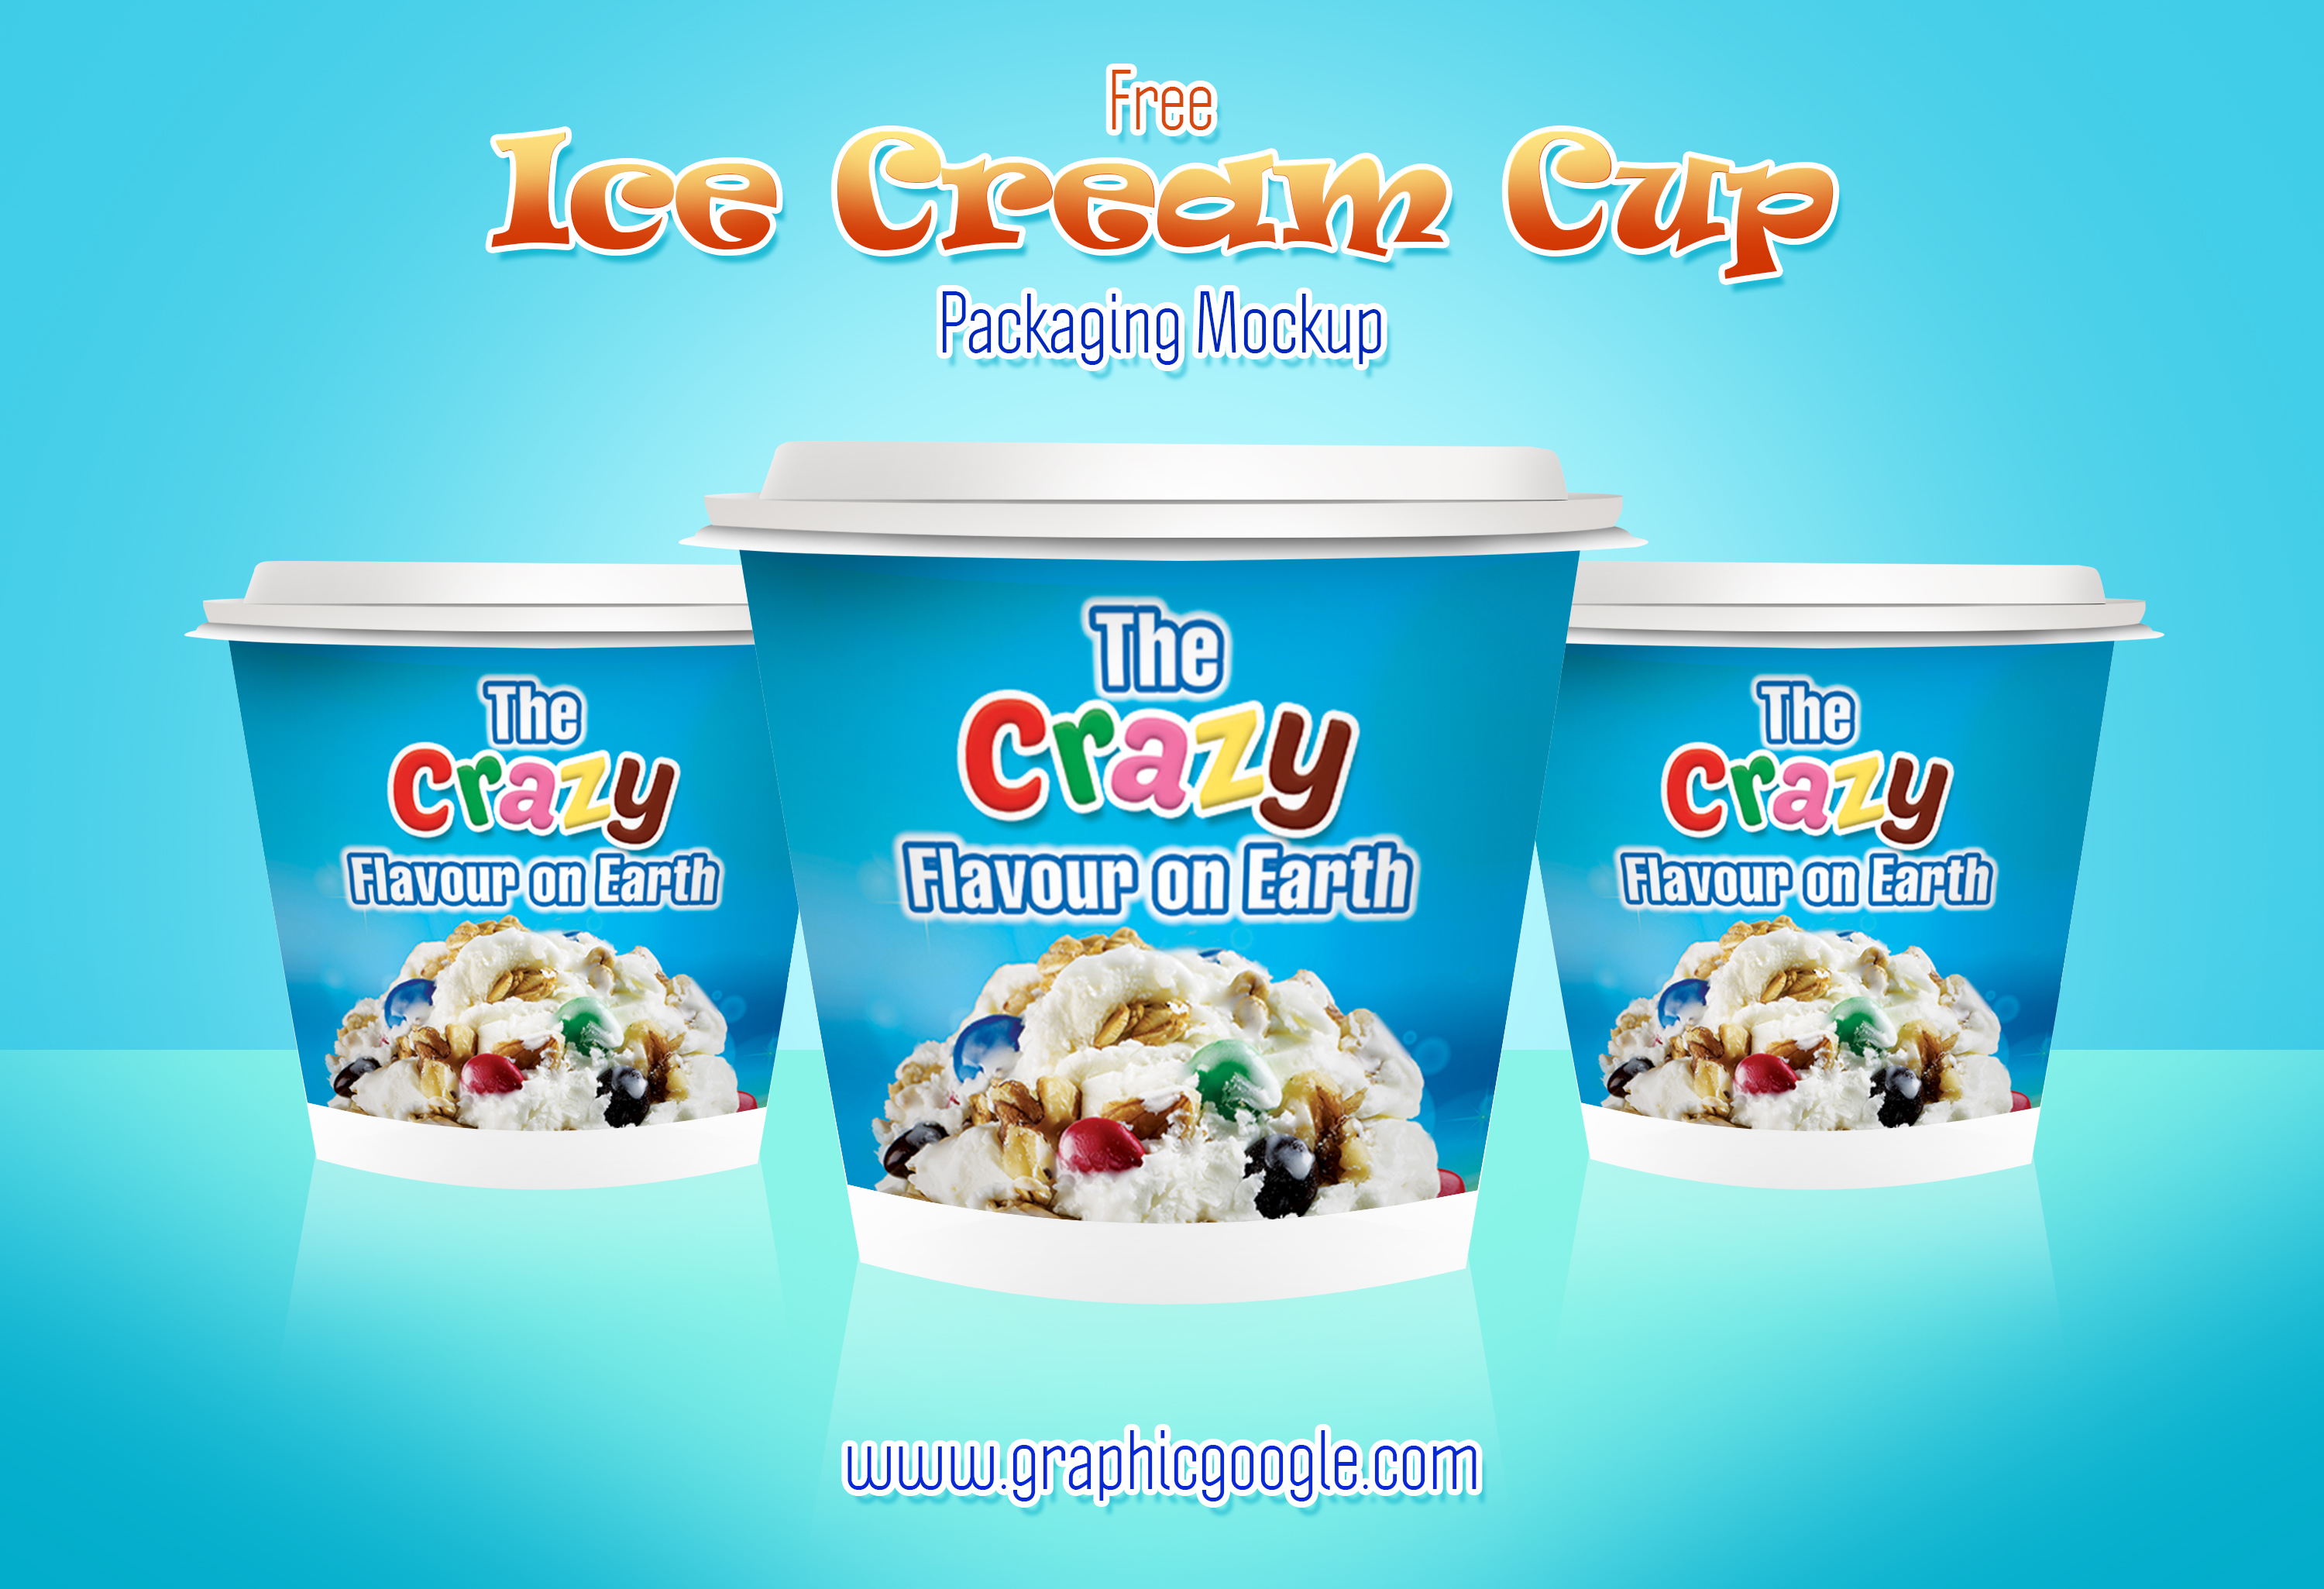 Download Free Free Ice Cream Cup Packaging Mockup Graphic Google Tasty Graphic Designs Collectiongraphic Google Tasty Graphic Designs Collection PSD Mockups.